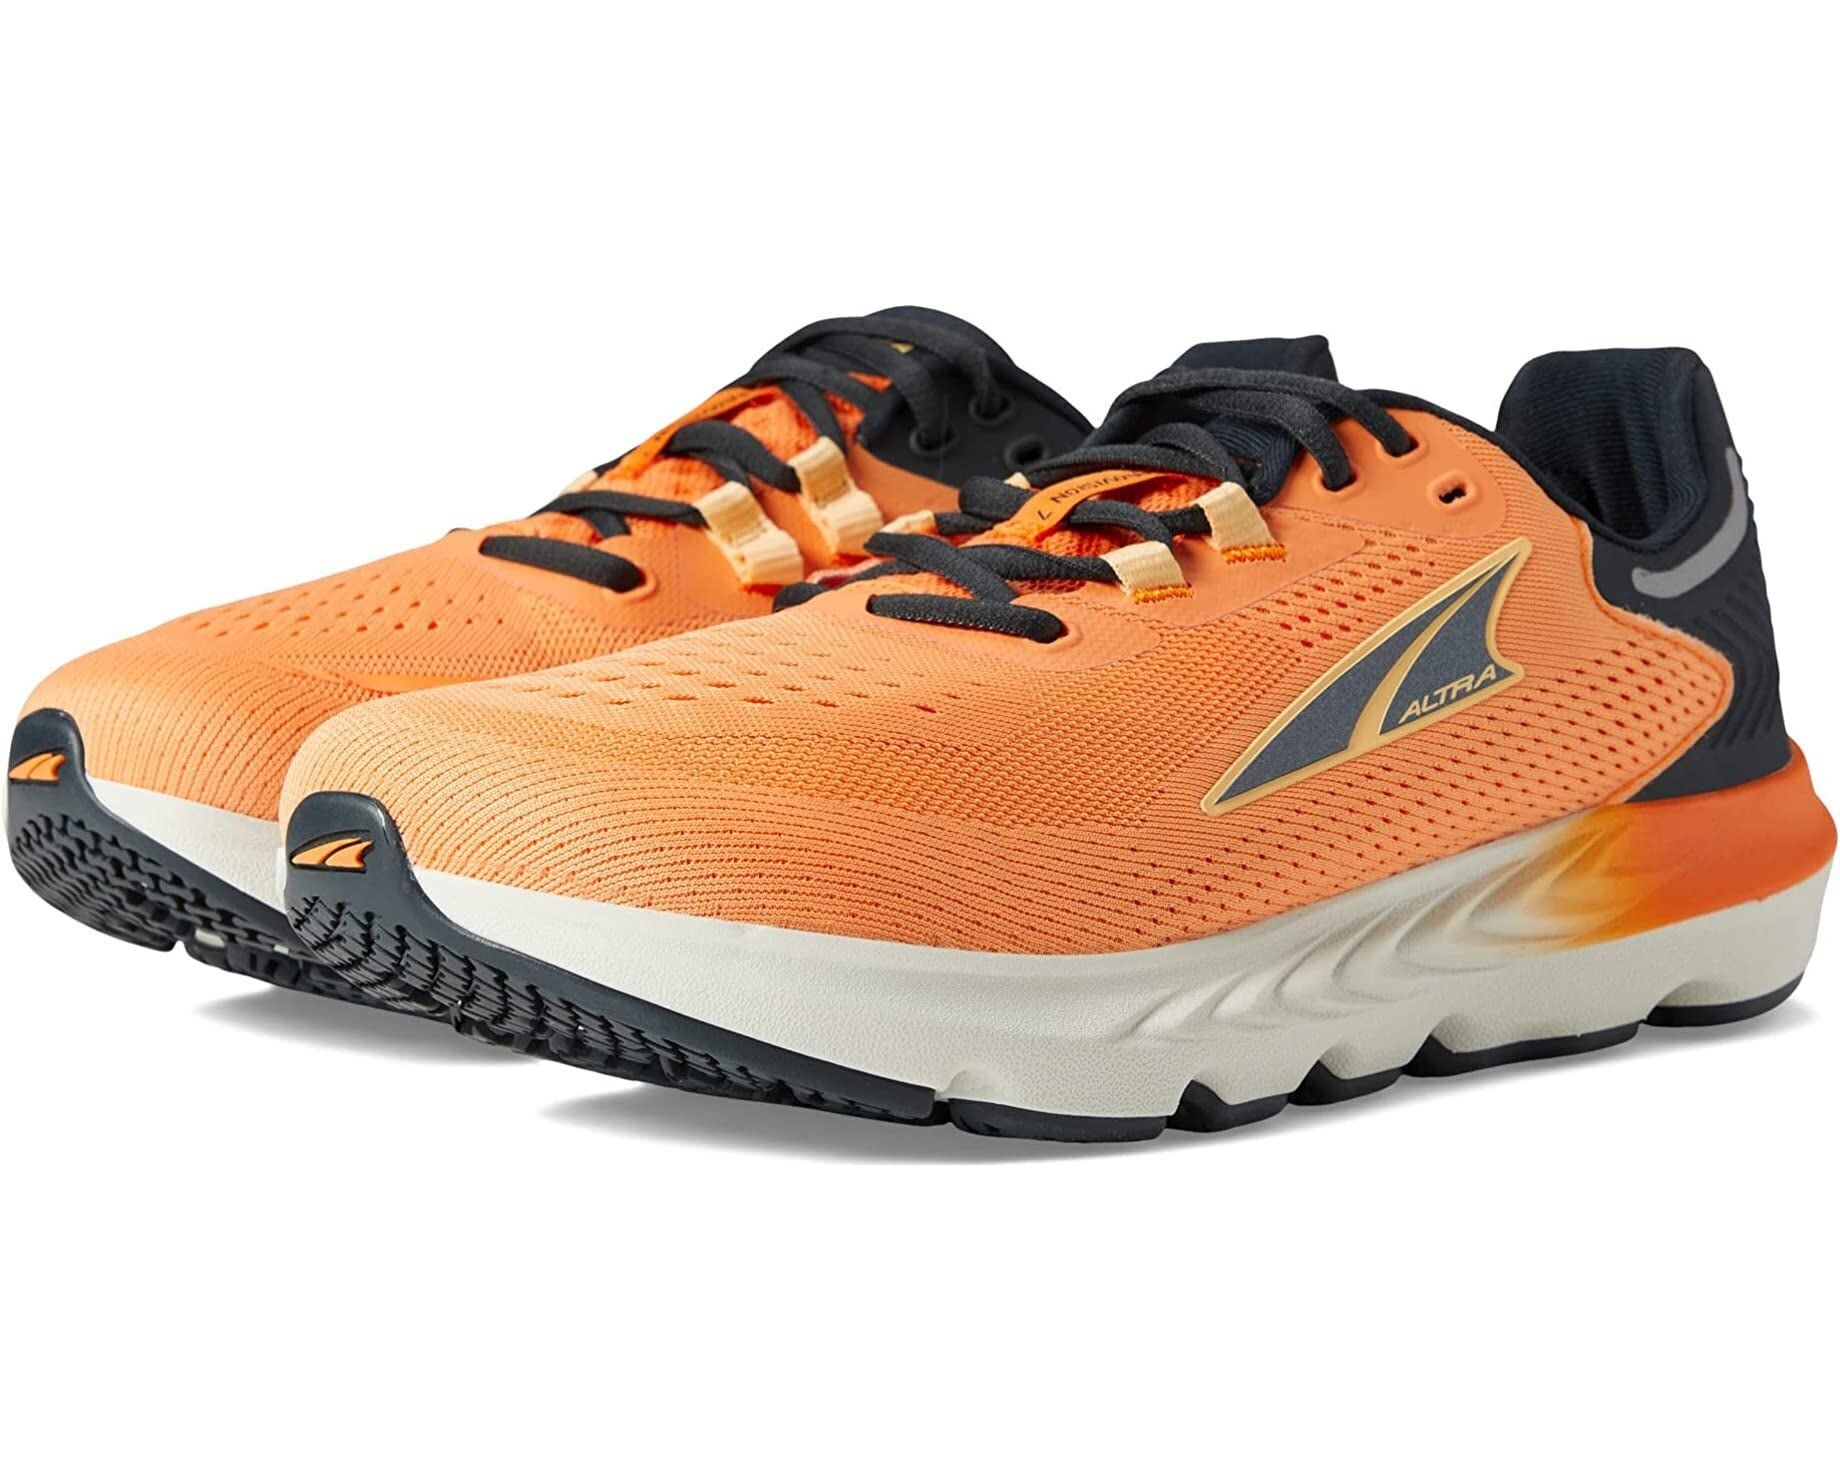 Highly-Rated Men's Running Shoes That Will Put A Spring In Your Step